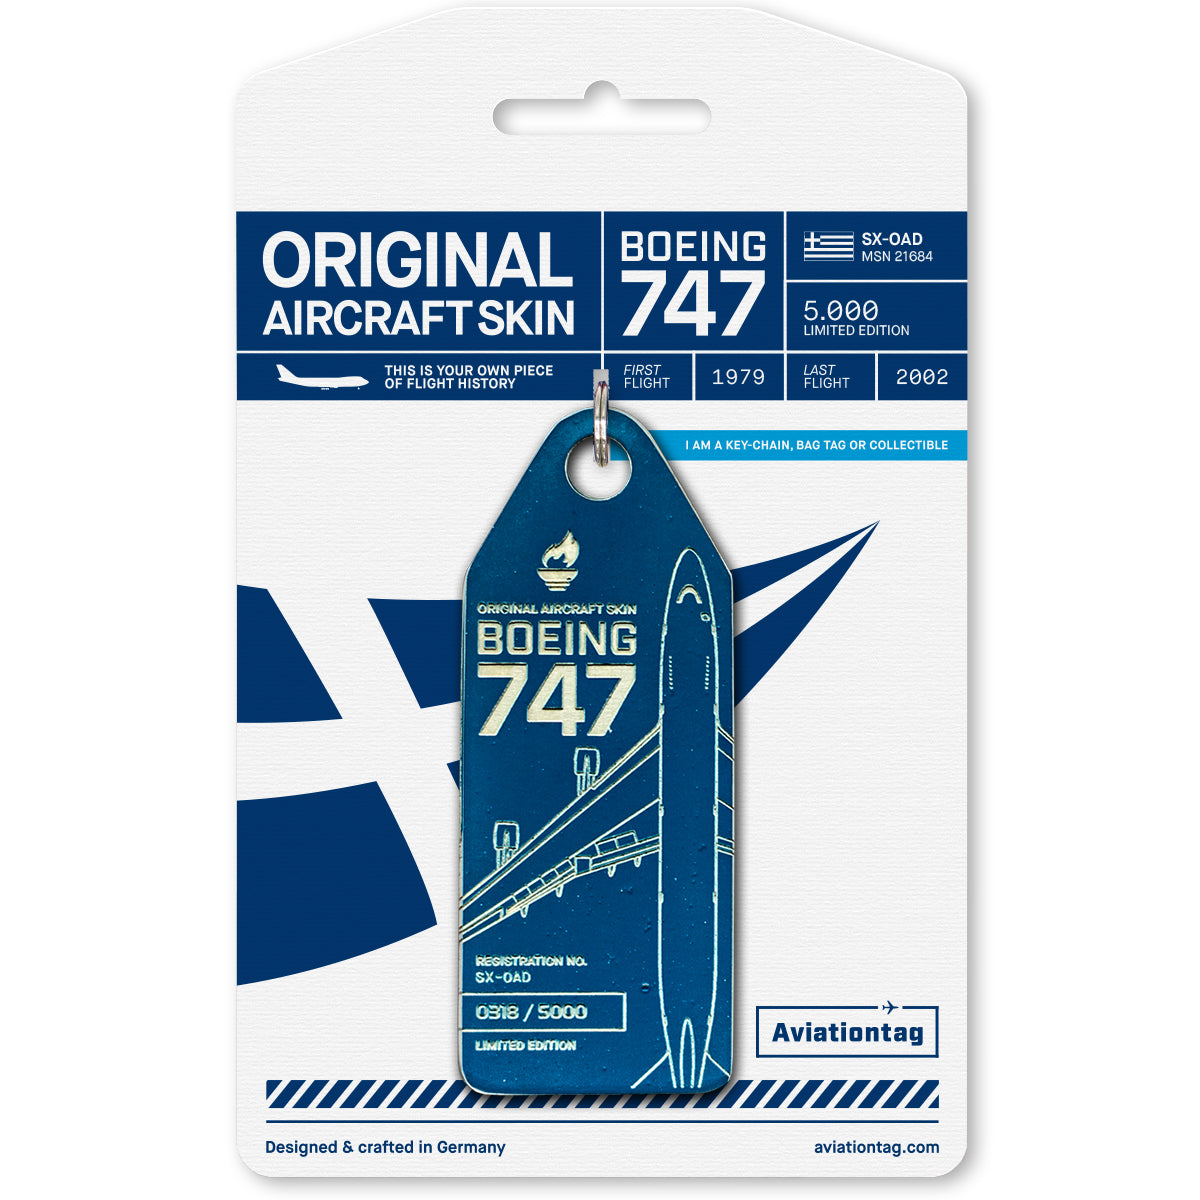 Boeing 747 - SX-OAD - Aviationtag